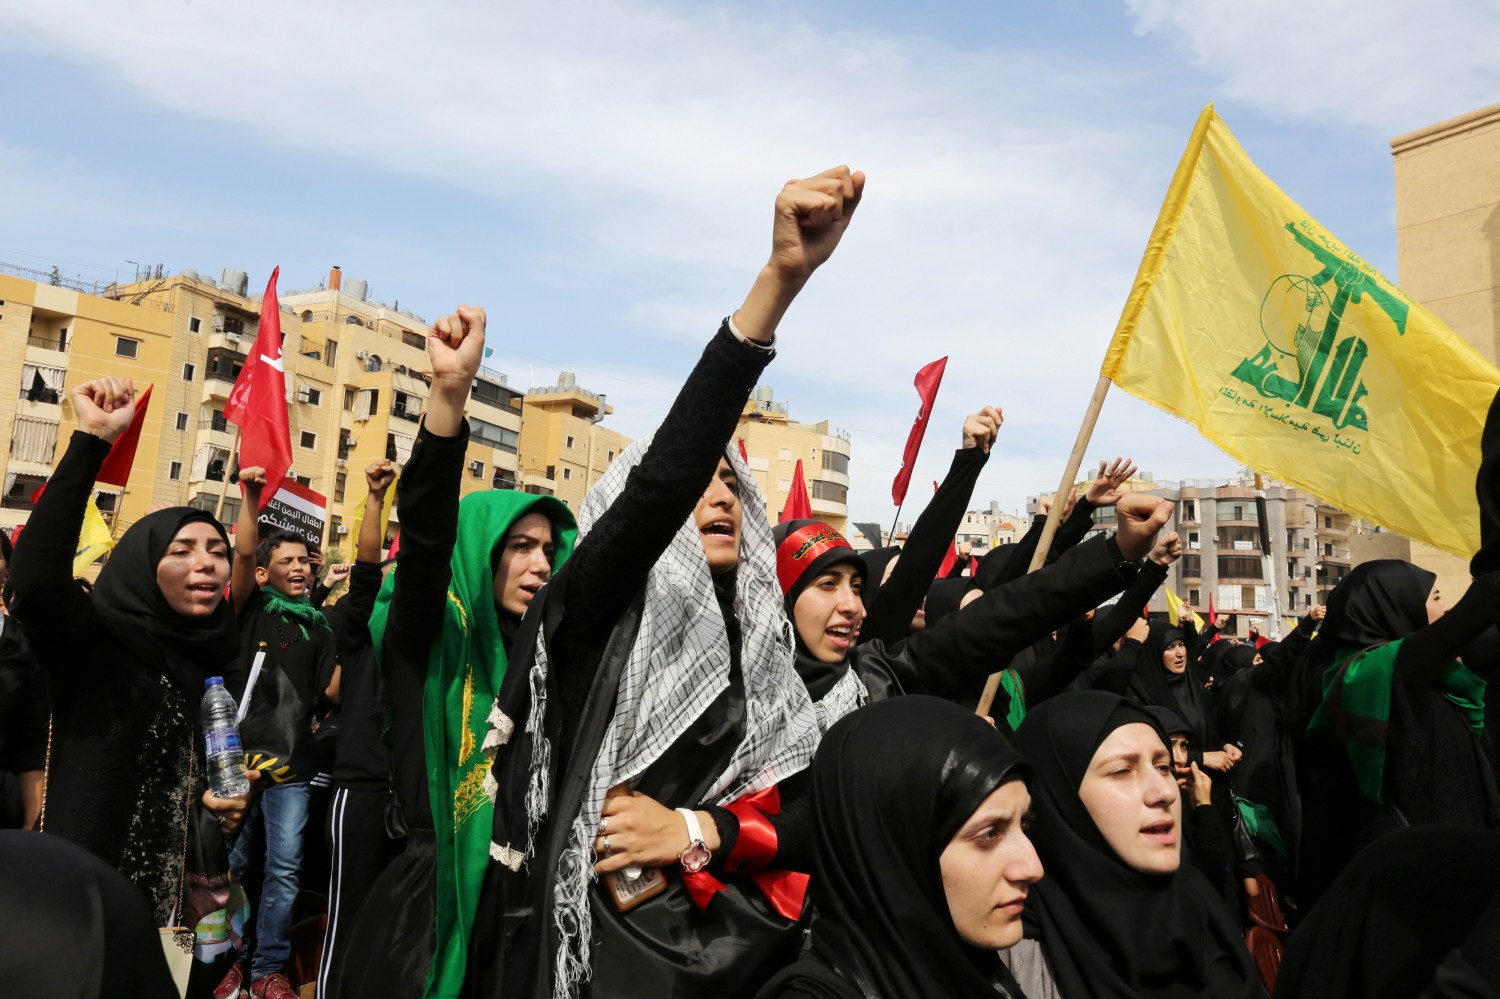 Lebanese Hezbollah women supporters chant slogans and carry a Hezbollah flag during a religious procession to mark Ashura in Beirut's southern suburbs, Lebanon October 12, 2016. REUTERS/Aziz Taher - RTSRWN9